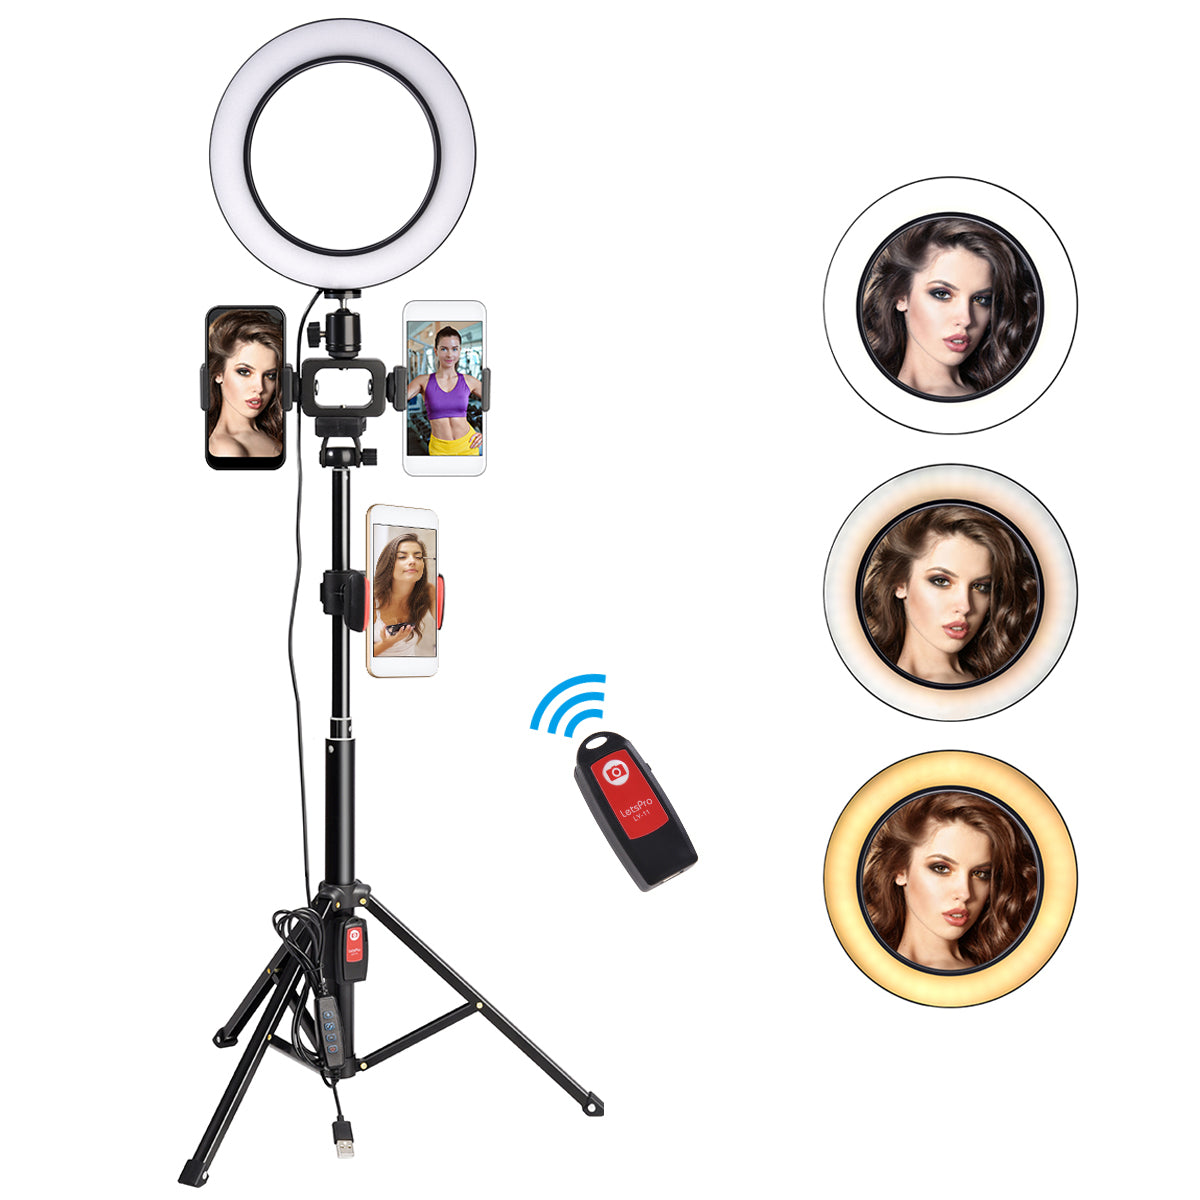 3 Colors LED Ring Light with Tripod Stand Phone Holder Remote Control Adjustable Height Multi USB Charging Cable